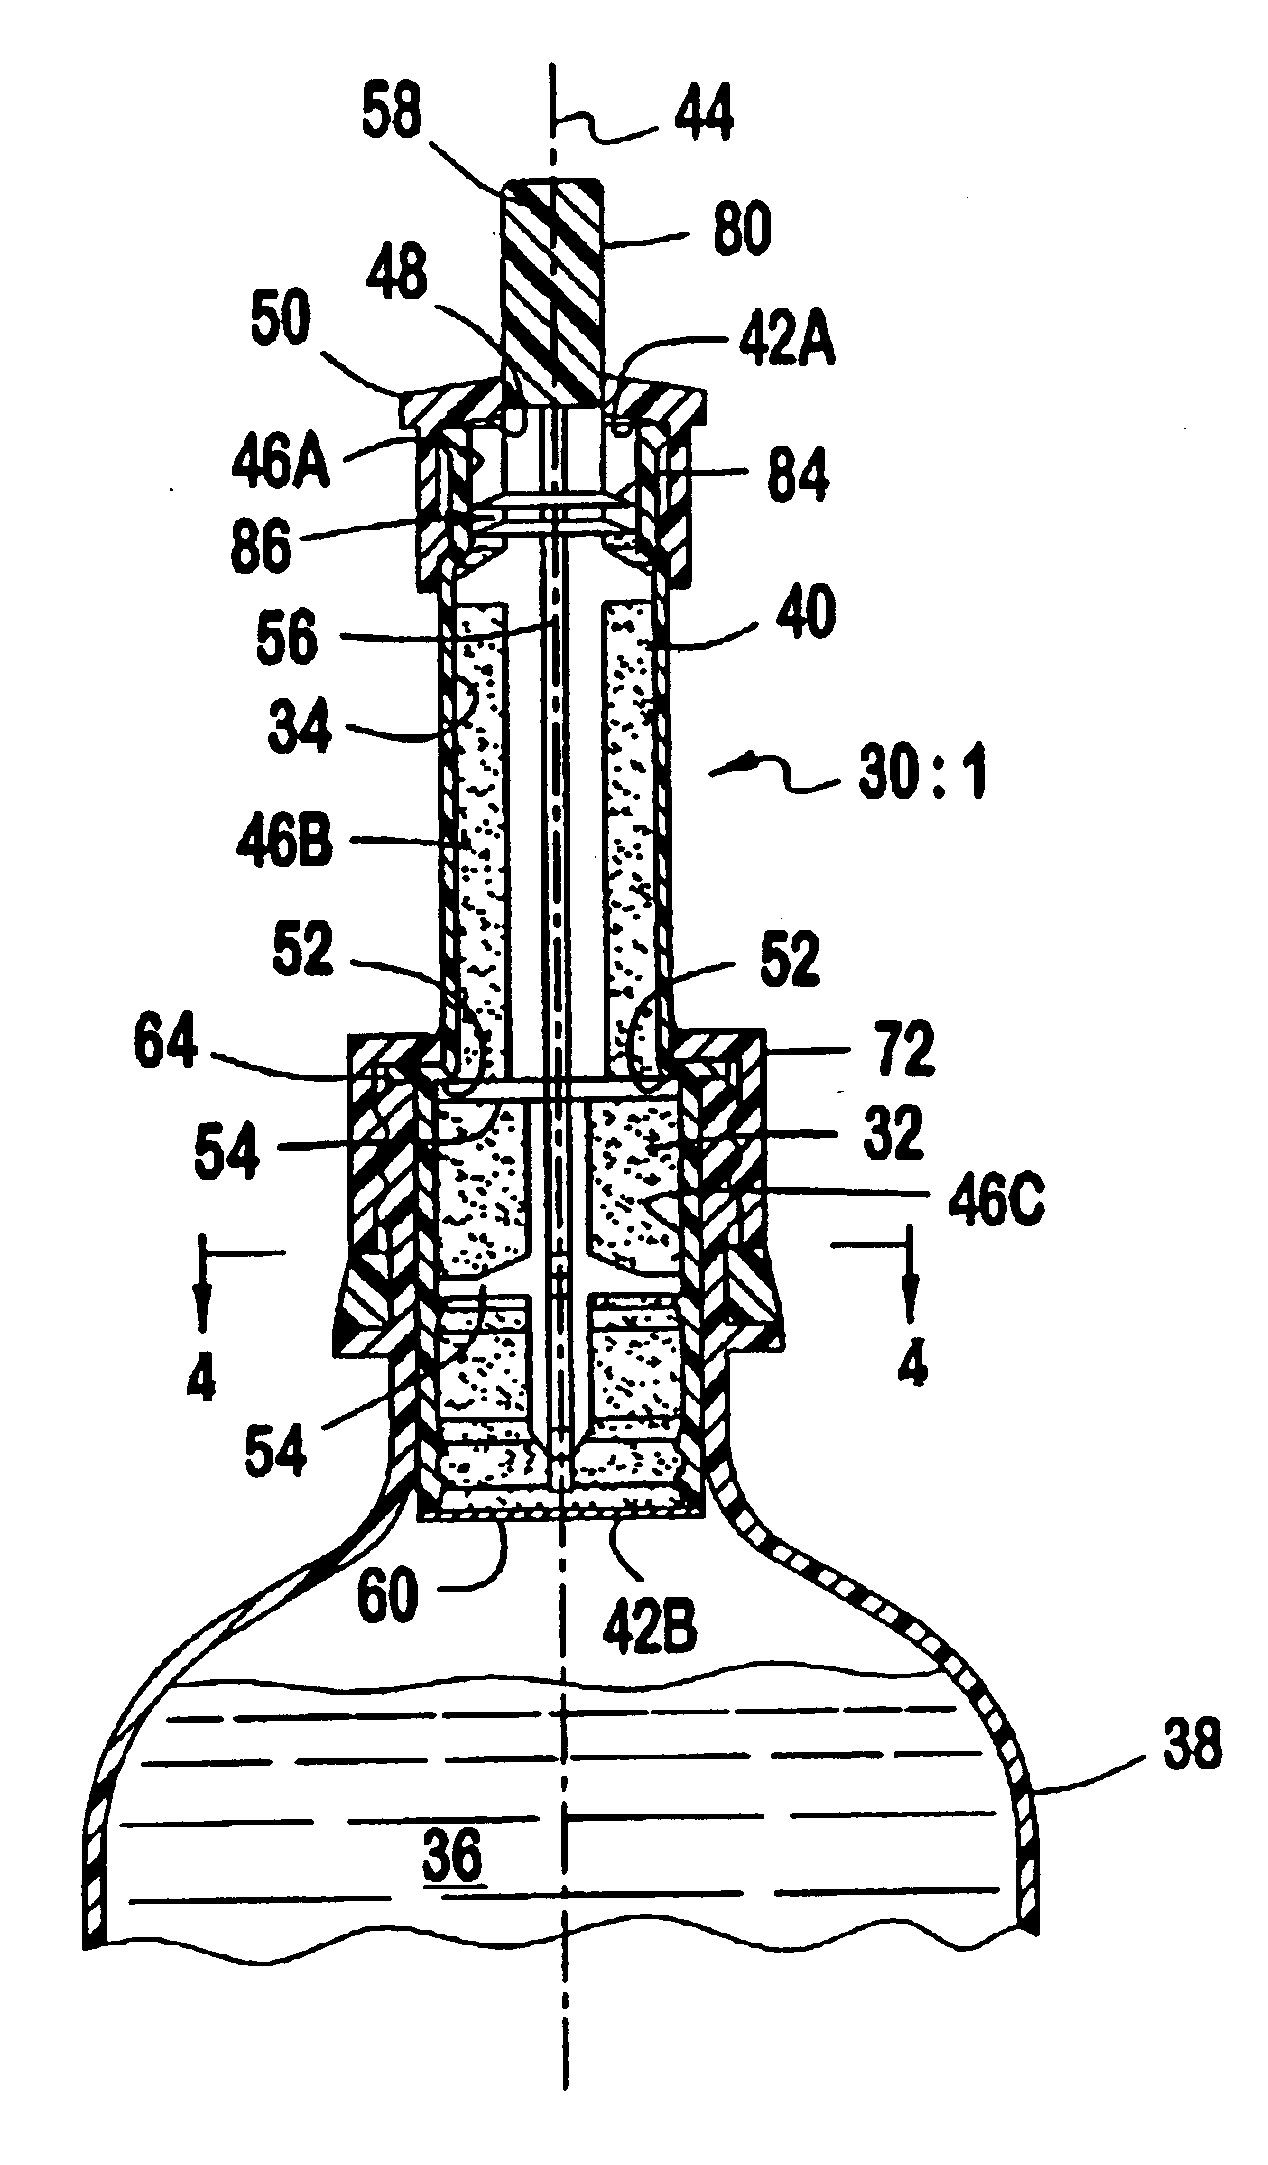 Flavoring component holding dispenser for use with consumable beverages